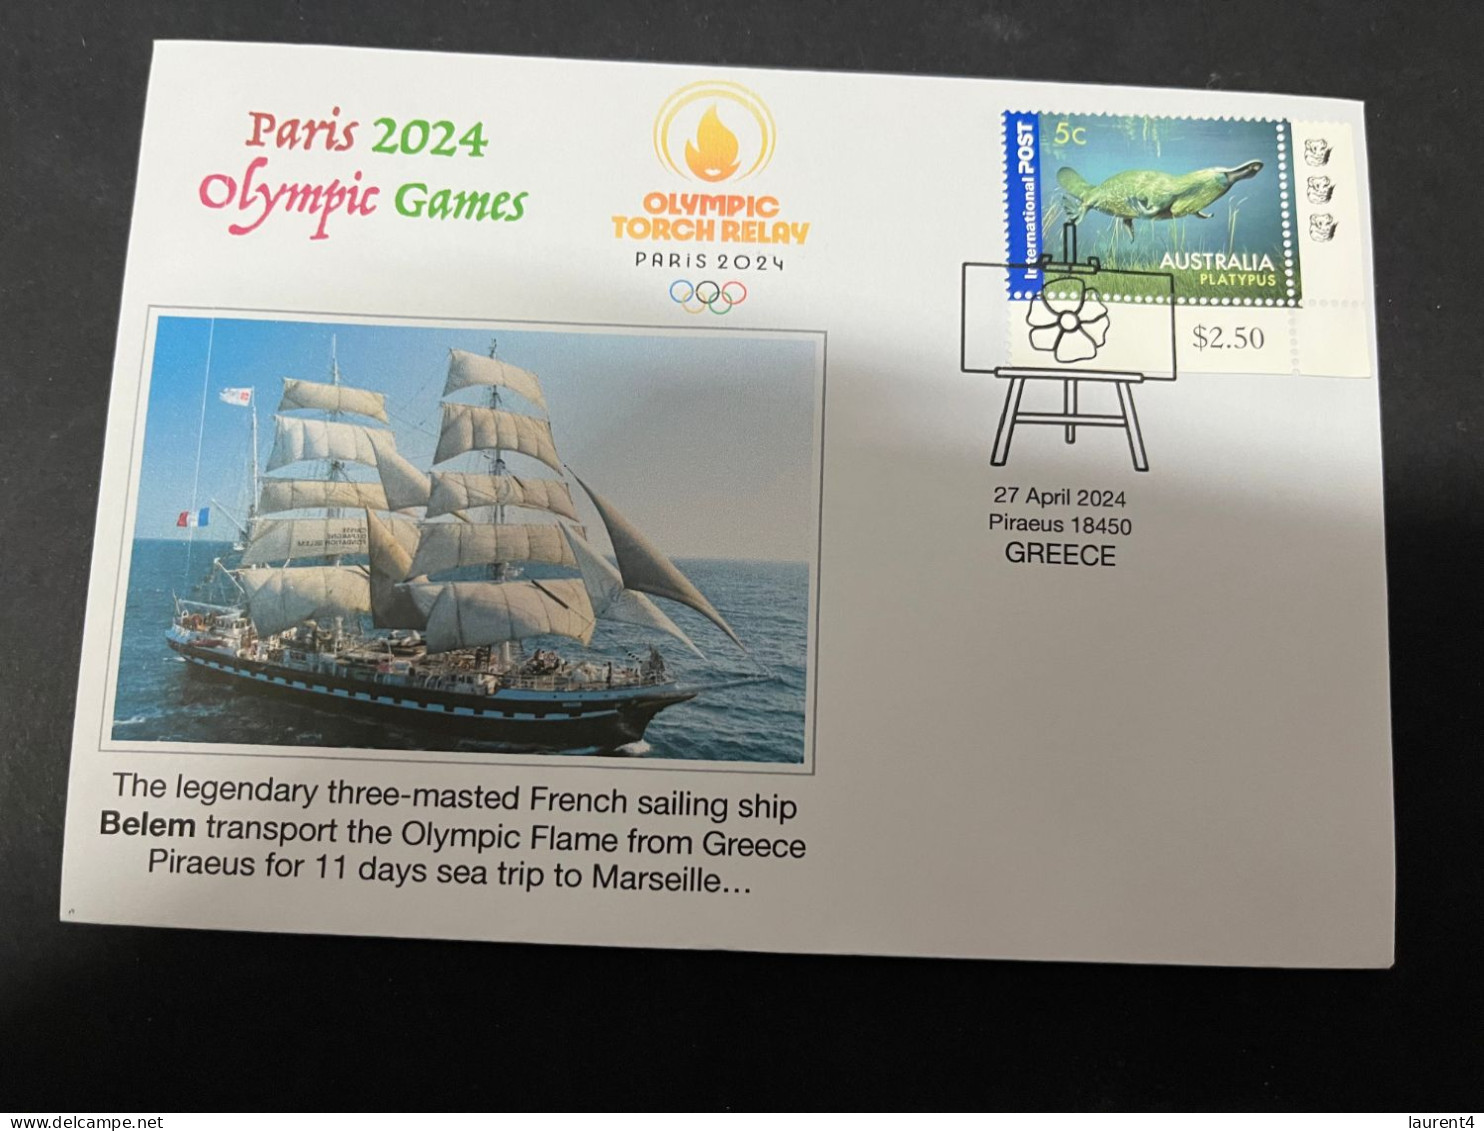 19-5-2024 (5 Z 32) Paris Olympic Games 2024 - The Olympic Flame Travel On Sail Ship BELEM (2 Covers) - Sommer 2024: Paris